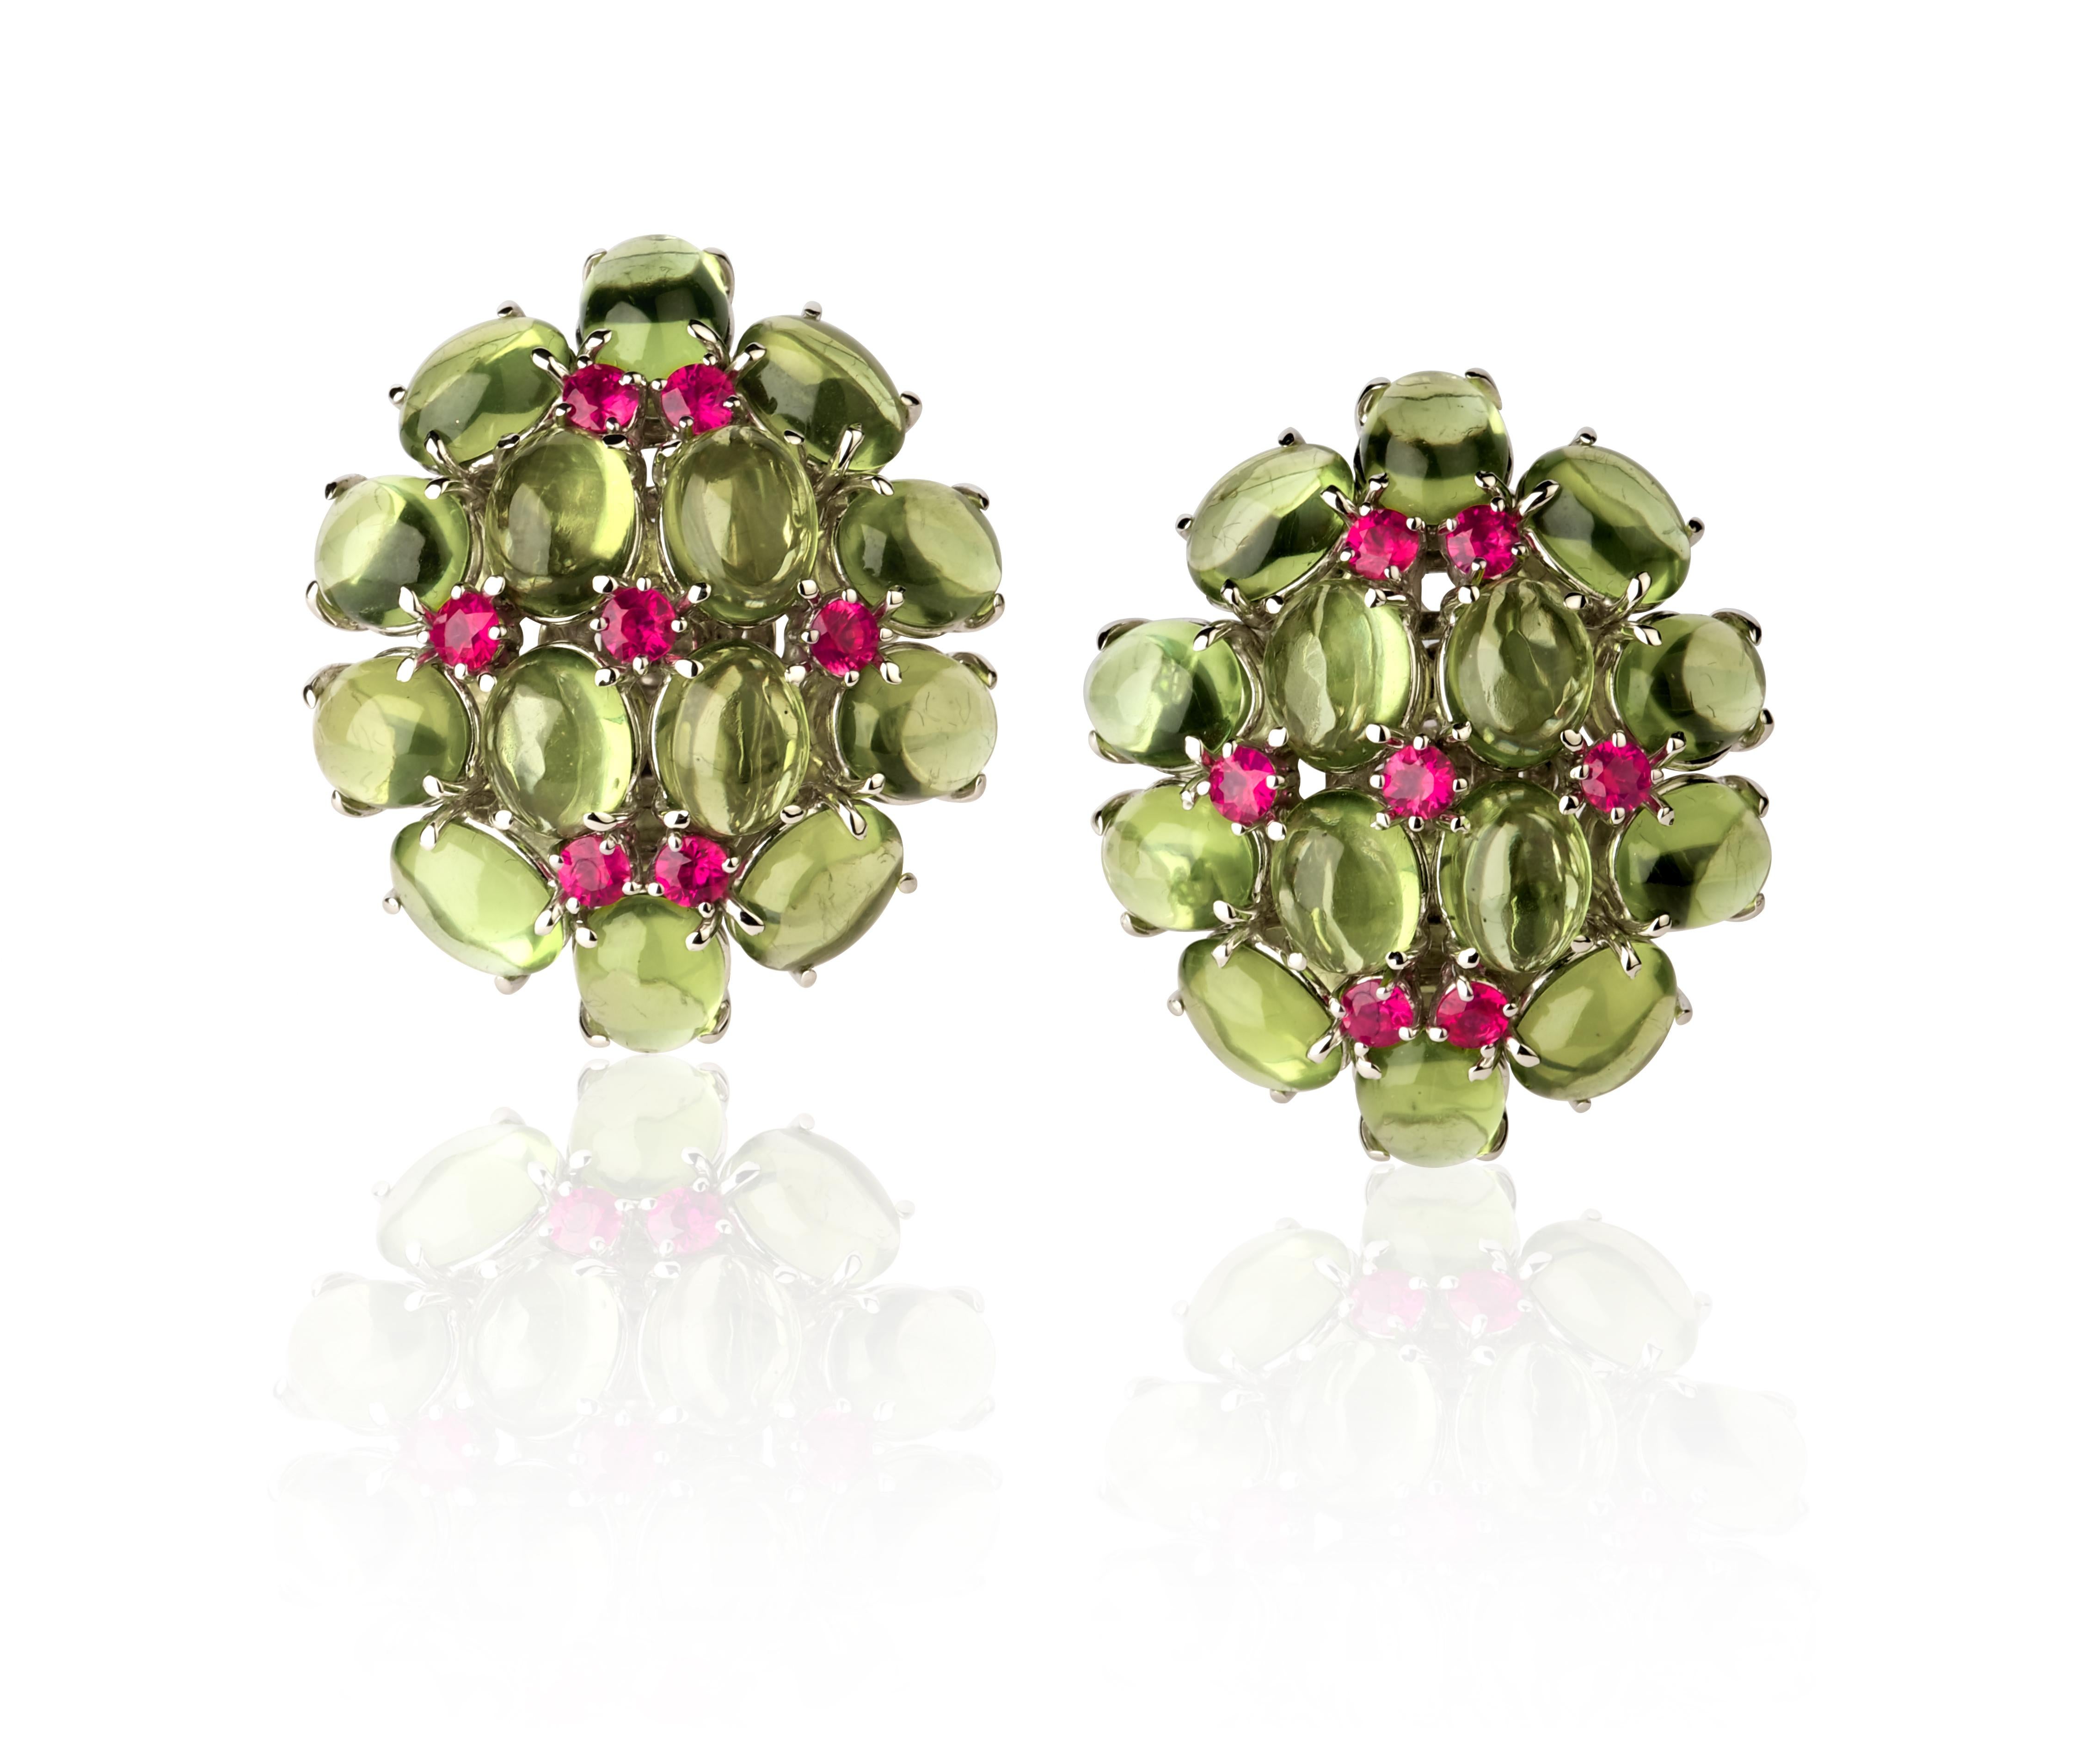 Vintage Oval Earrings From ANGELETTI PRIVATE COLLECTION White gold with Cabochon Peridots and Pink Sapphires.
The Earrings were manufactured in ‘60s in Italy by expert Goldsmith from Valenza.
The n. 14 Cabochon Peridot together n. 7 Pink Sapphires